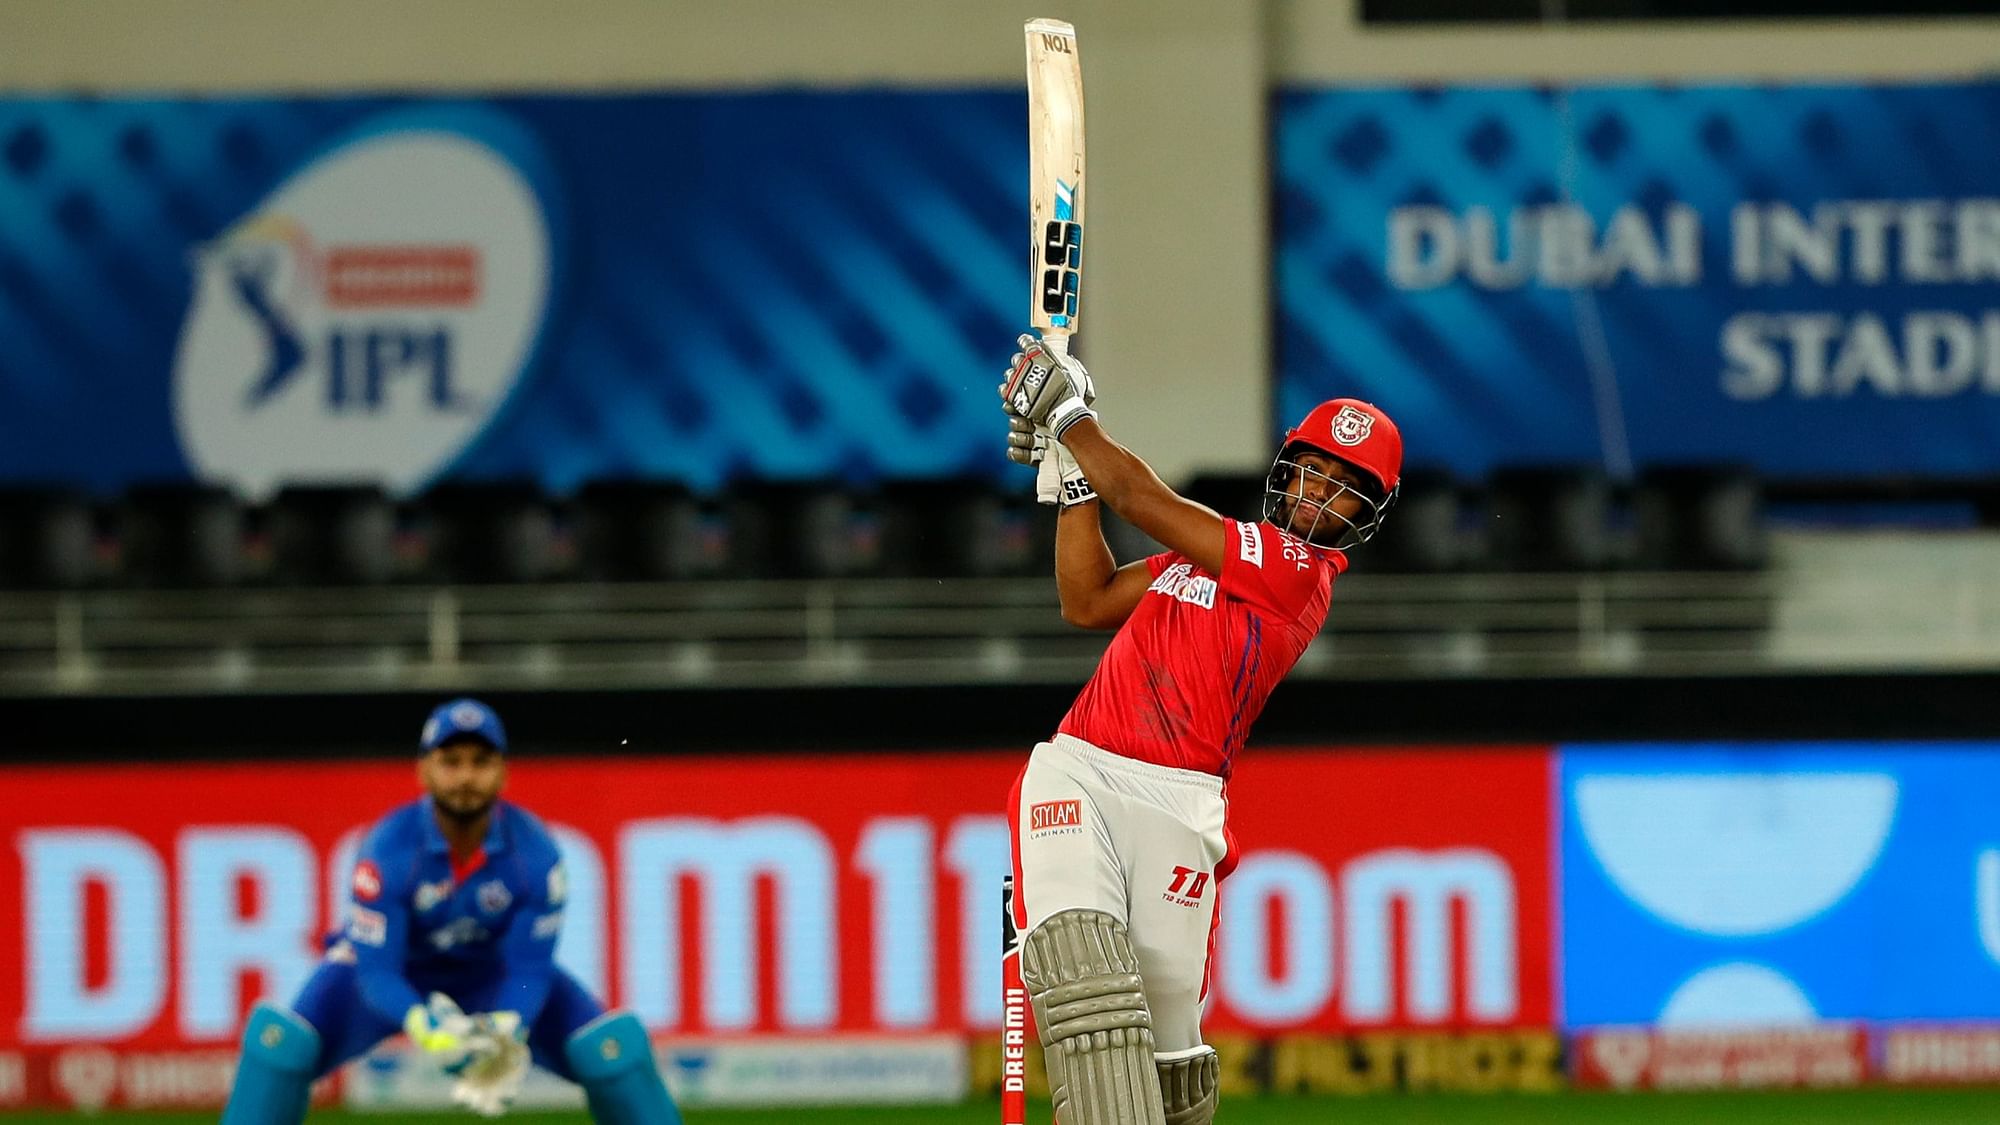 Nicholas Pooran played a blistering knock of 53 off 28 balls, to help KXIP chase down DC’s 164.